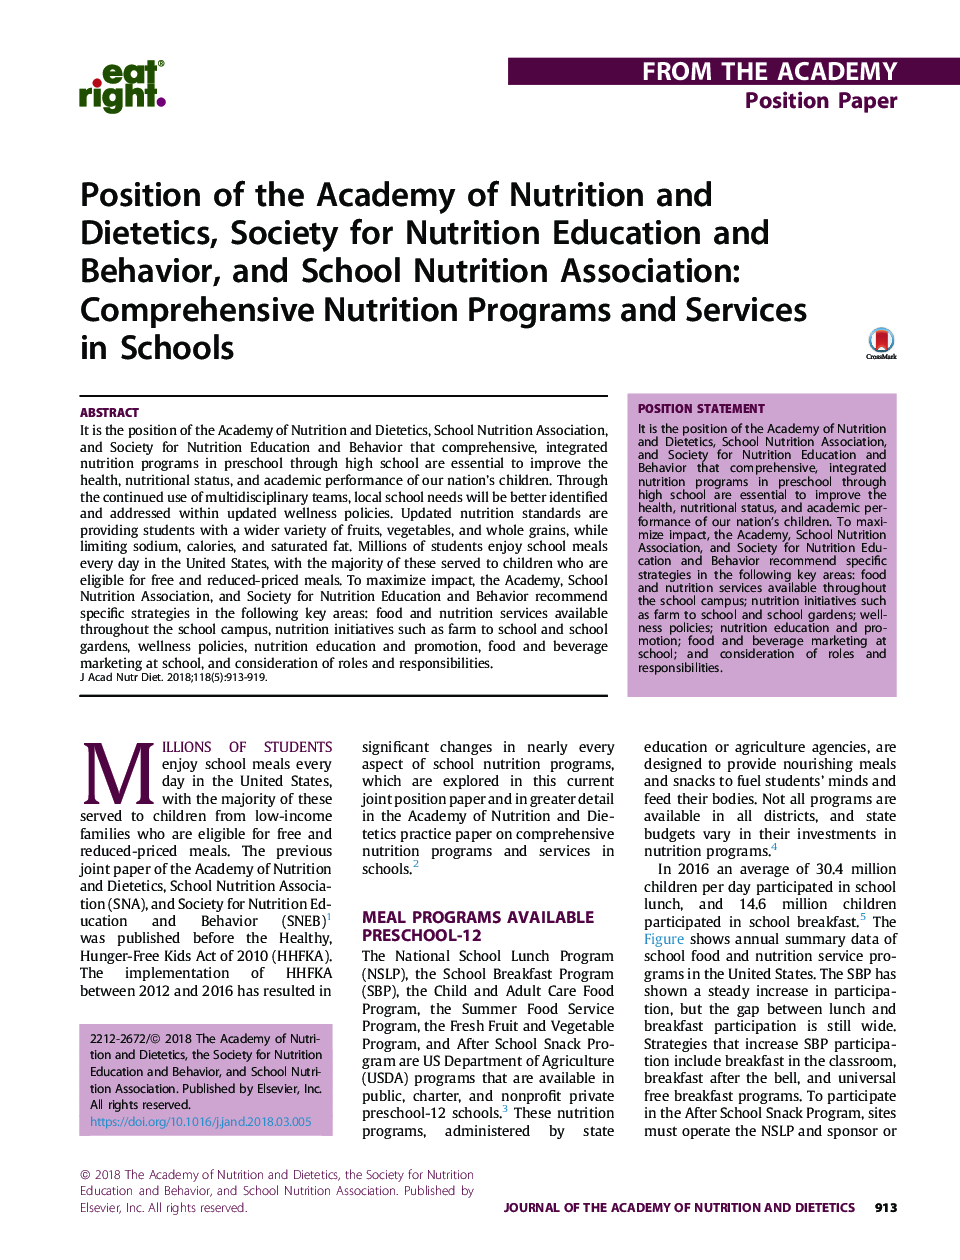 Position of the Academy of Nutrition and Dietetics, Society for Nutrition Education and Behavior, and School Nutrition Association: Comprehensive Nutrition Programs and Services in Schools